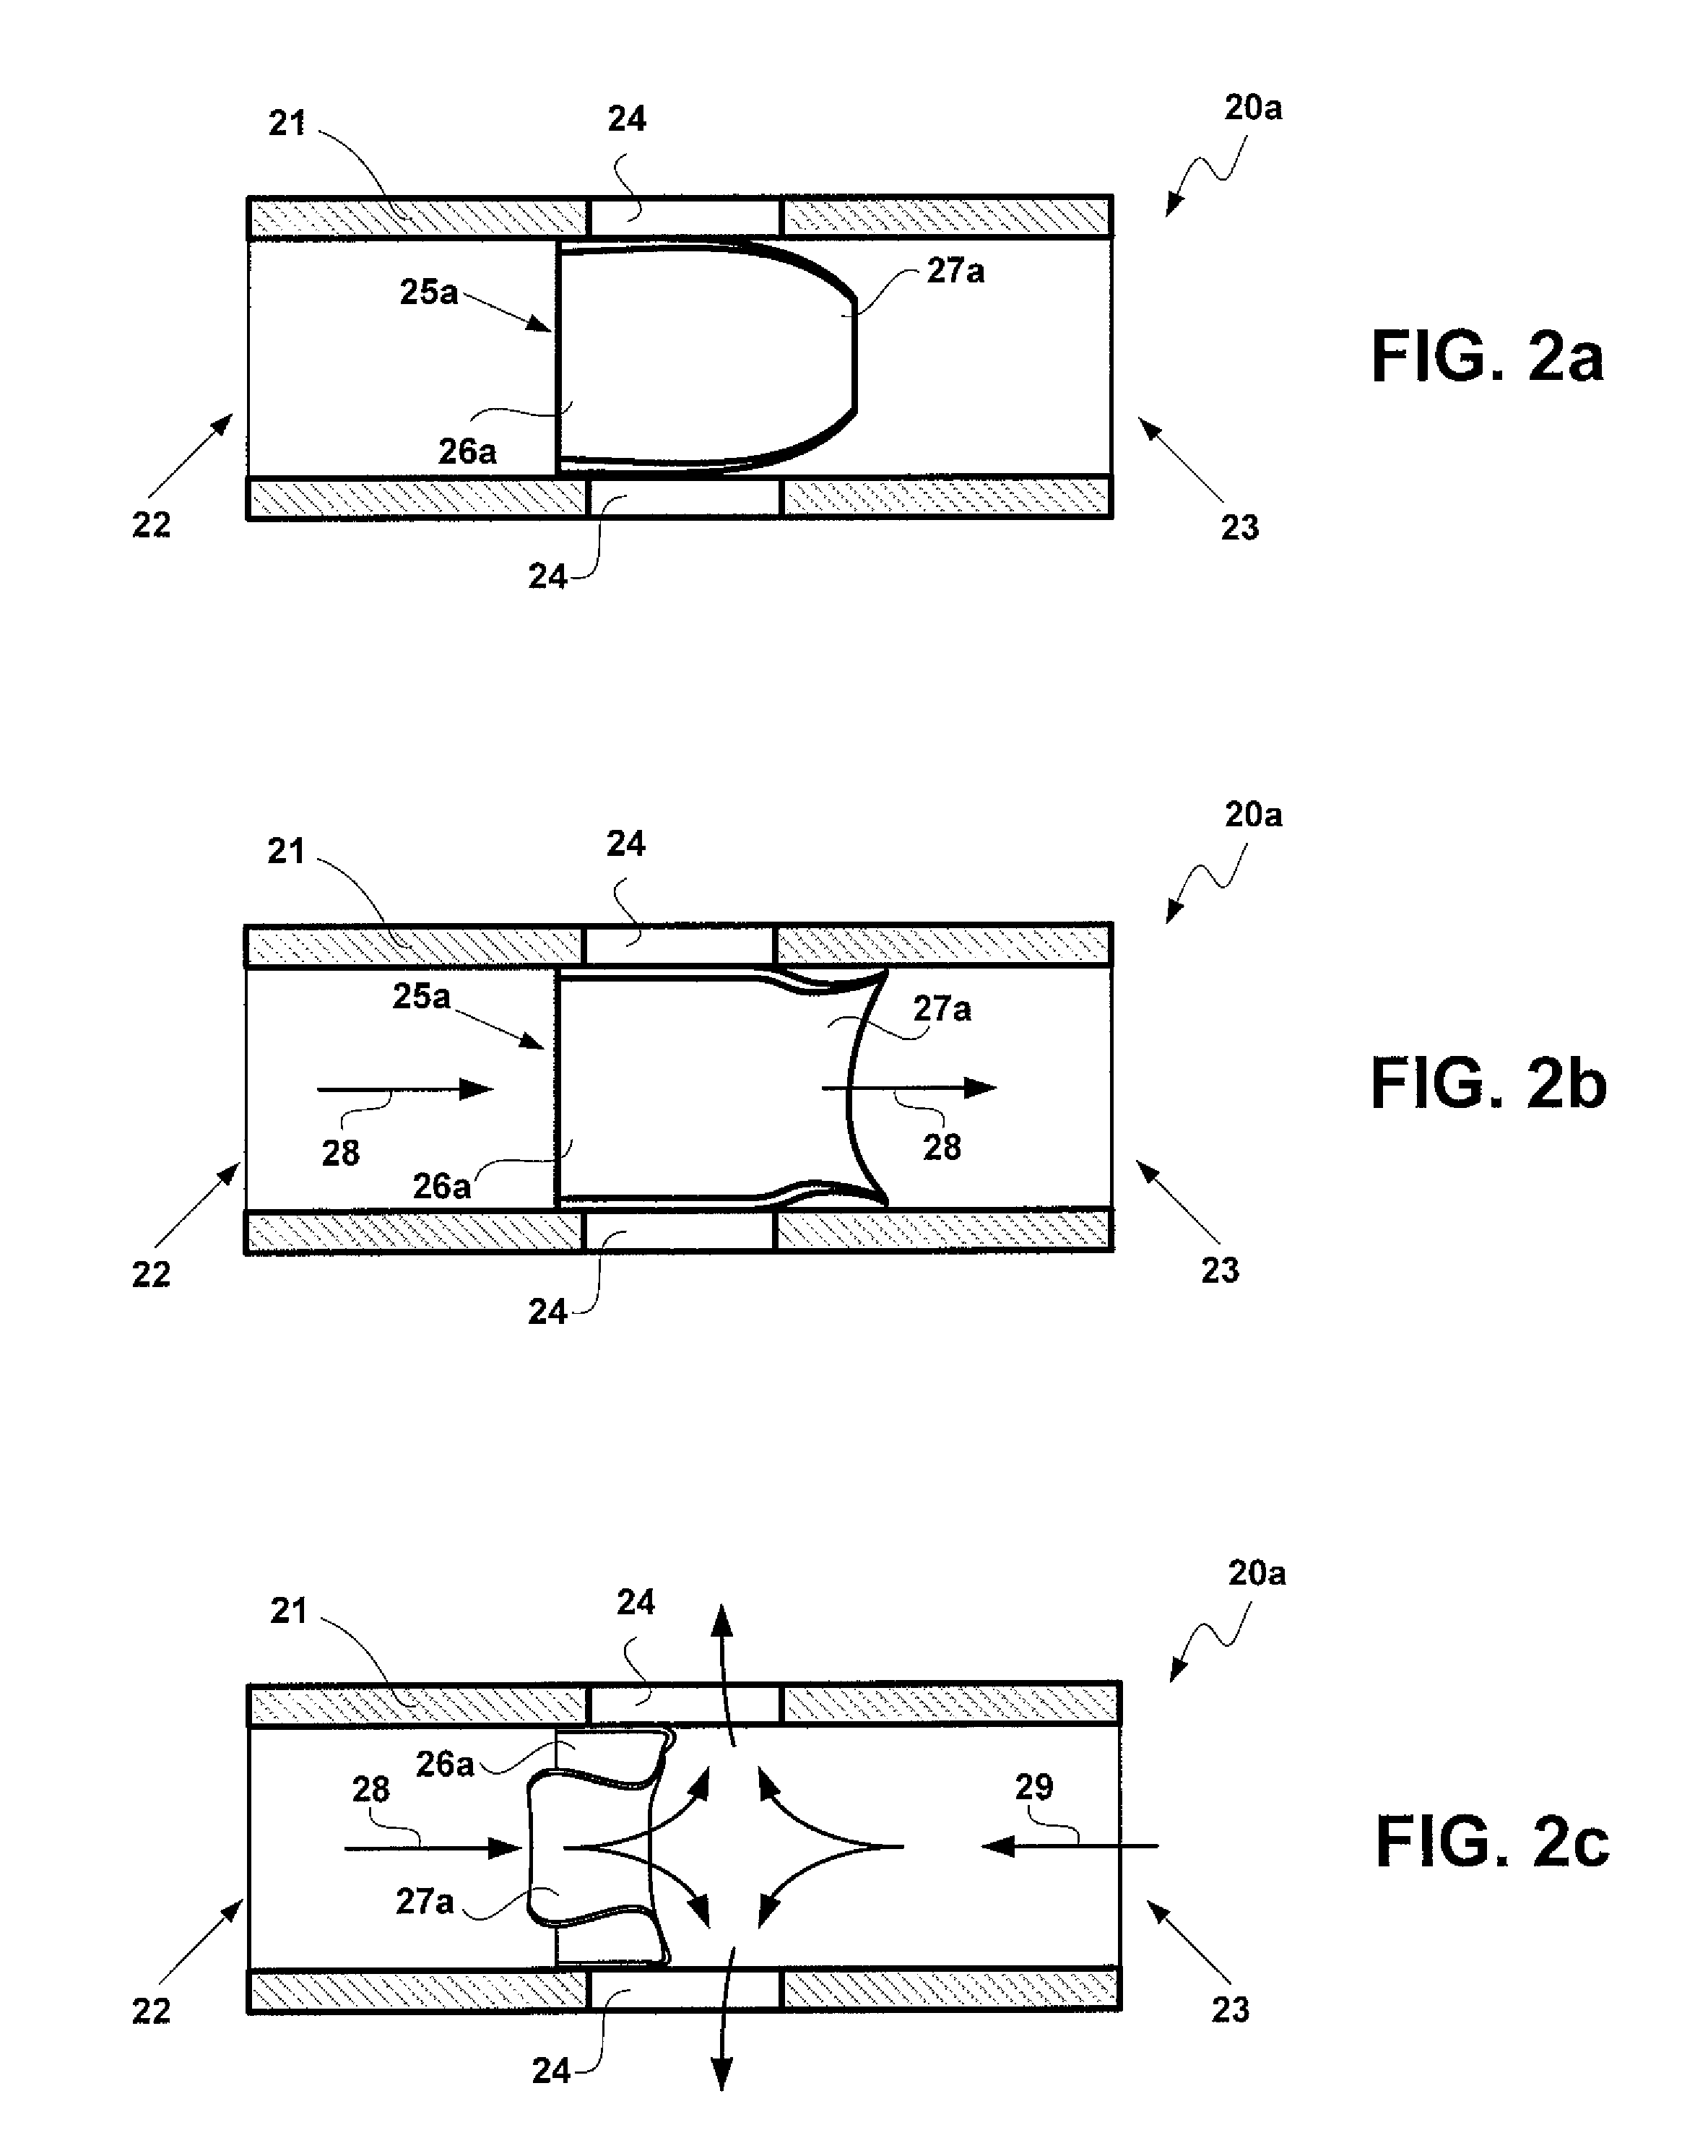 Pressure reducing valve with flexible cuff